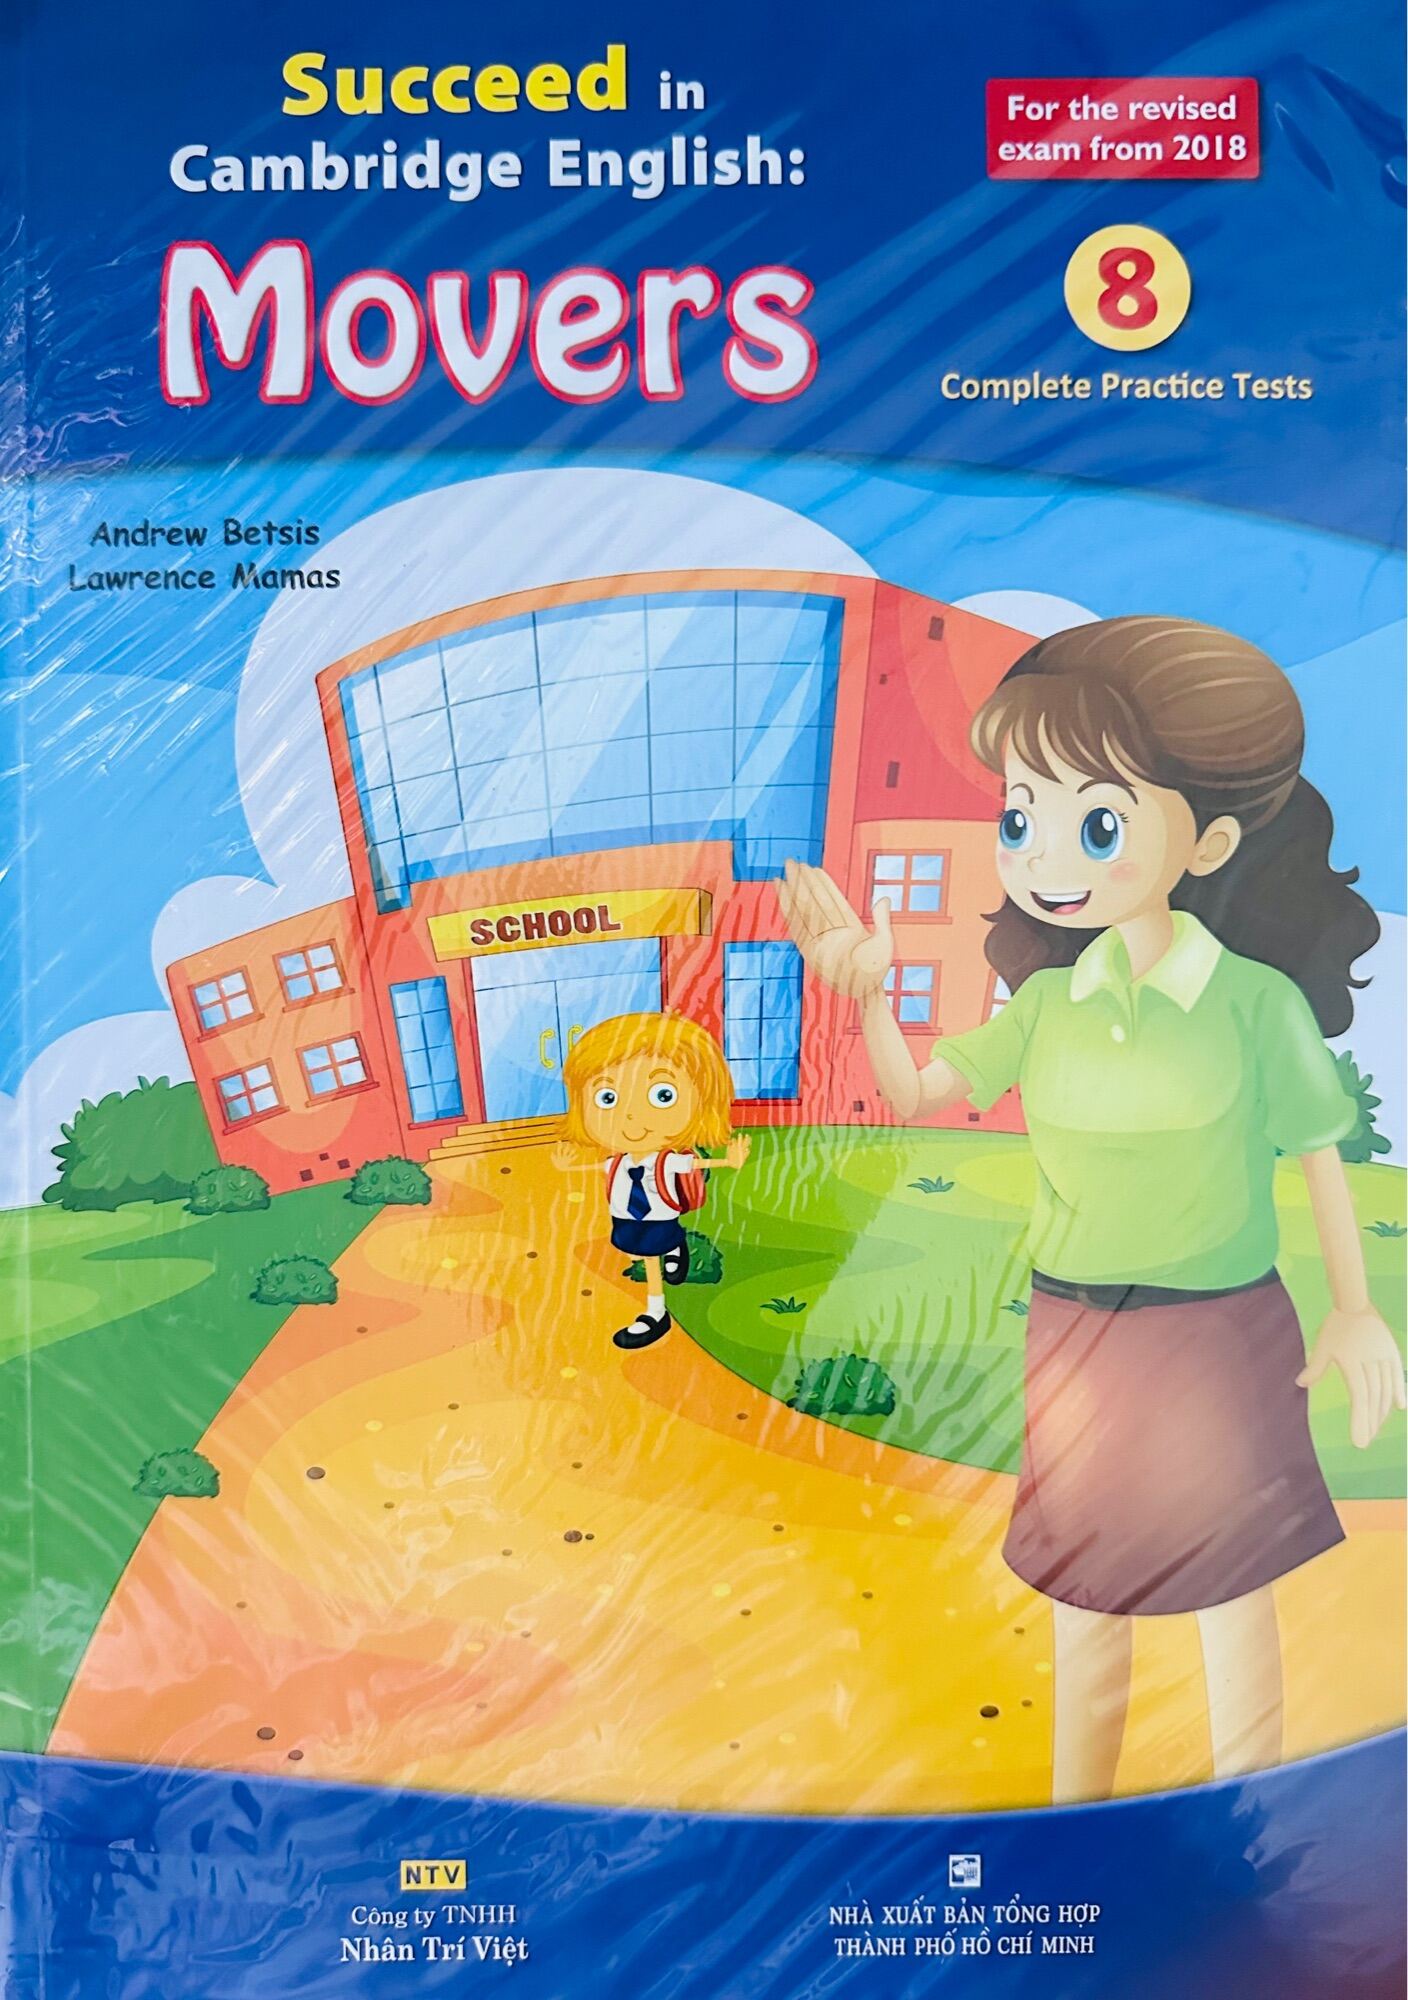 Succeed in Cambridge English Movers 8 practice tests with CD